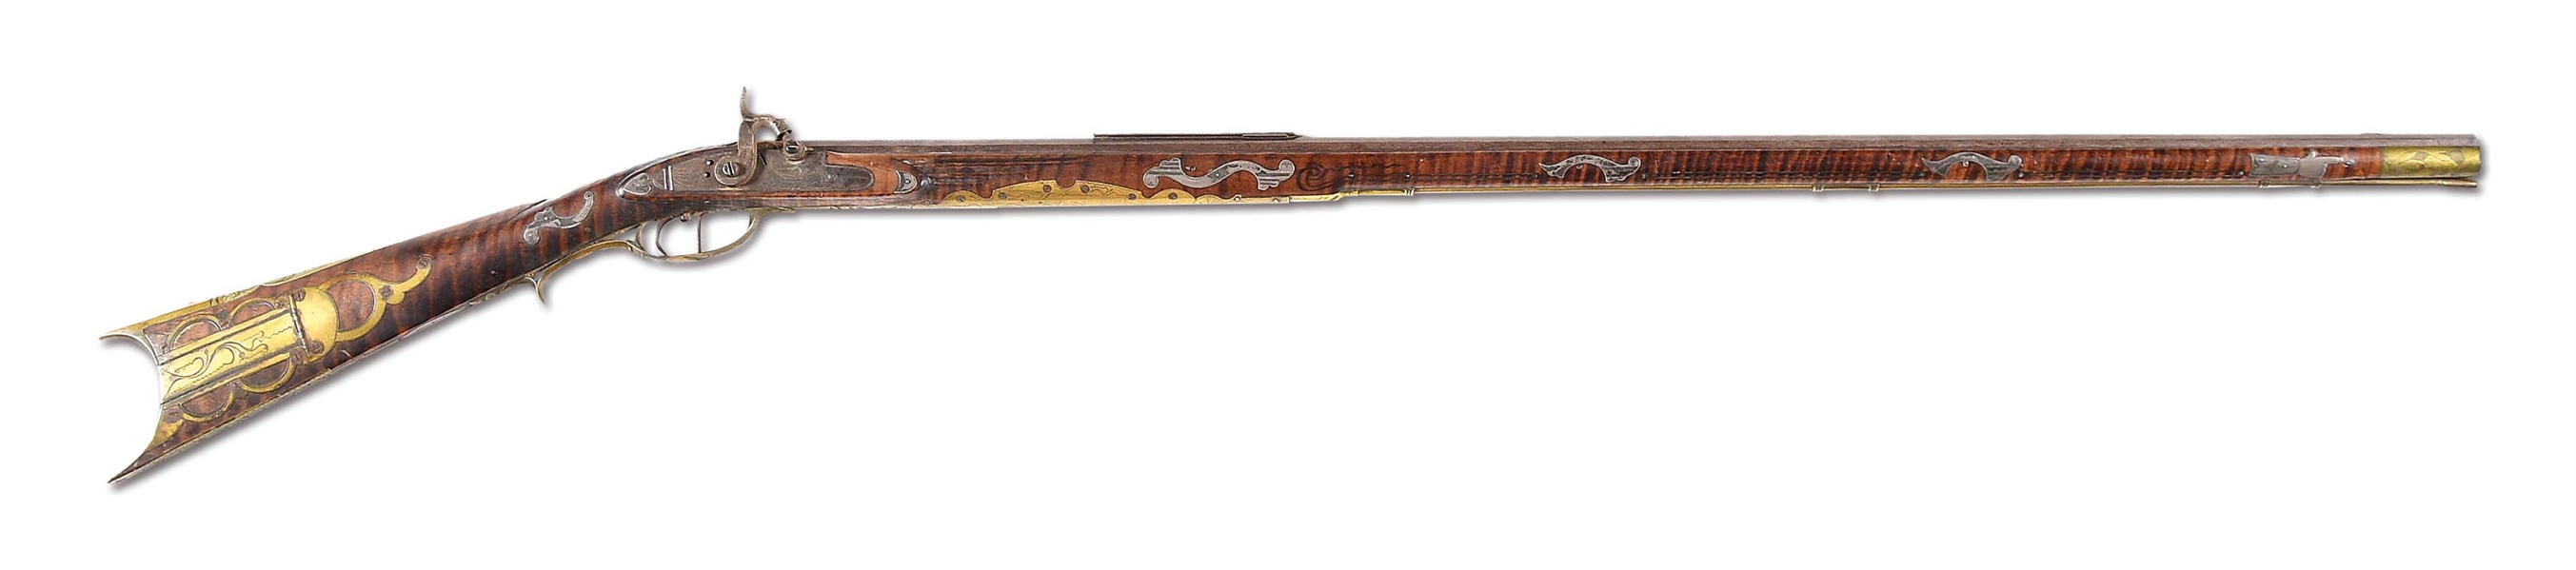 (A) FANTASTIC AND UNTOUCHED DIMINUTIVE SAMUEL STULL SIGNED PERCUSSION KENTUCKY RIFLE DATED 1850 AND DECORATED WITH 28 ENGRAVED SILVER INLAYS.